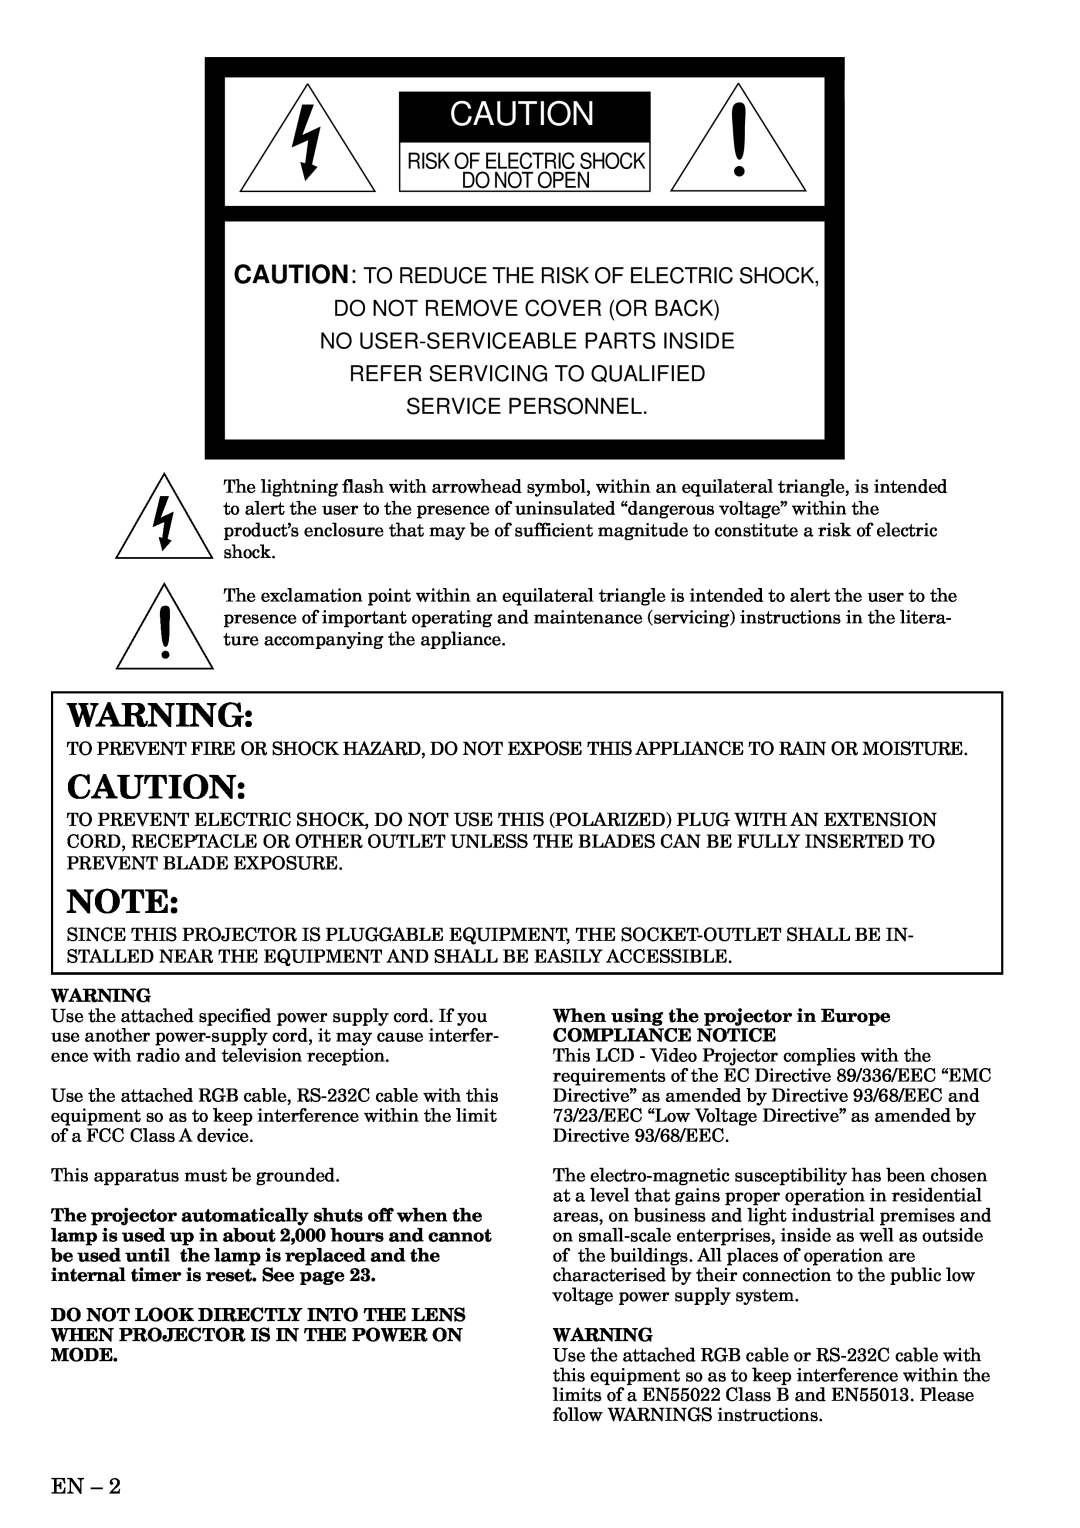 Mitsubishi Electronics X70B user manual Risk Of Electric Shock Do Not Open, Caution To Reduce The Risk Of Electric Shock 